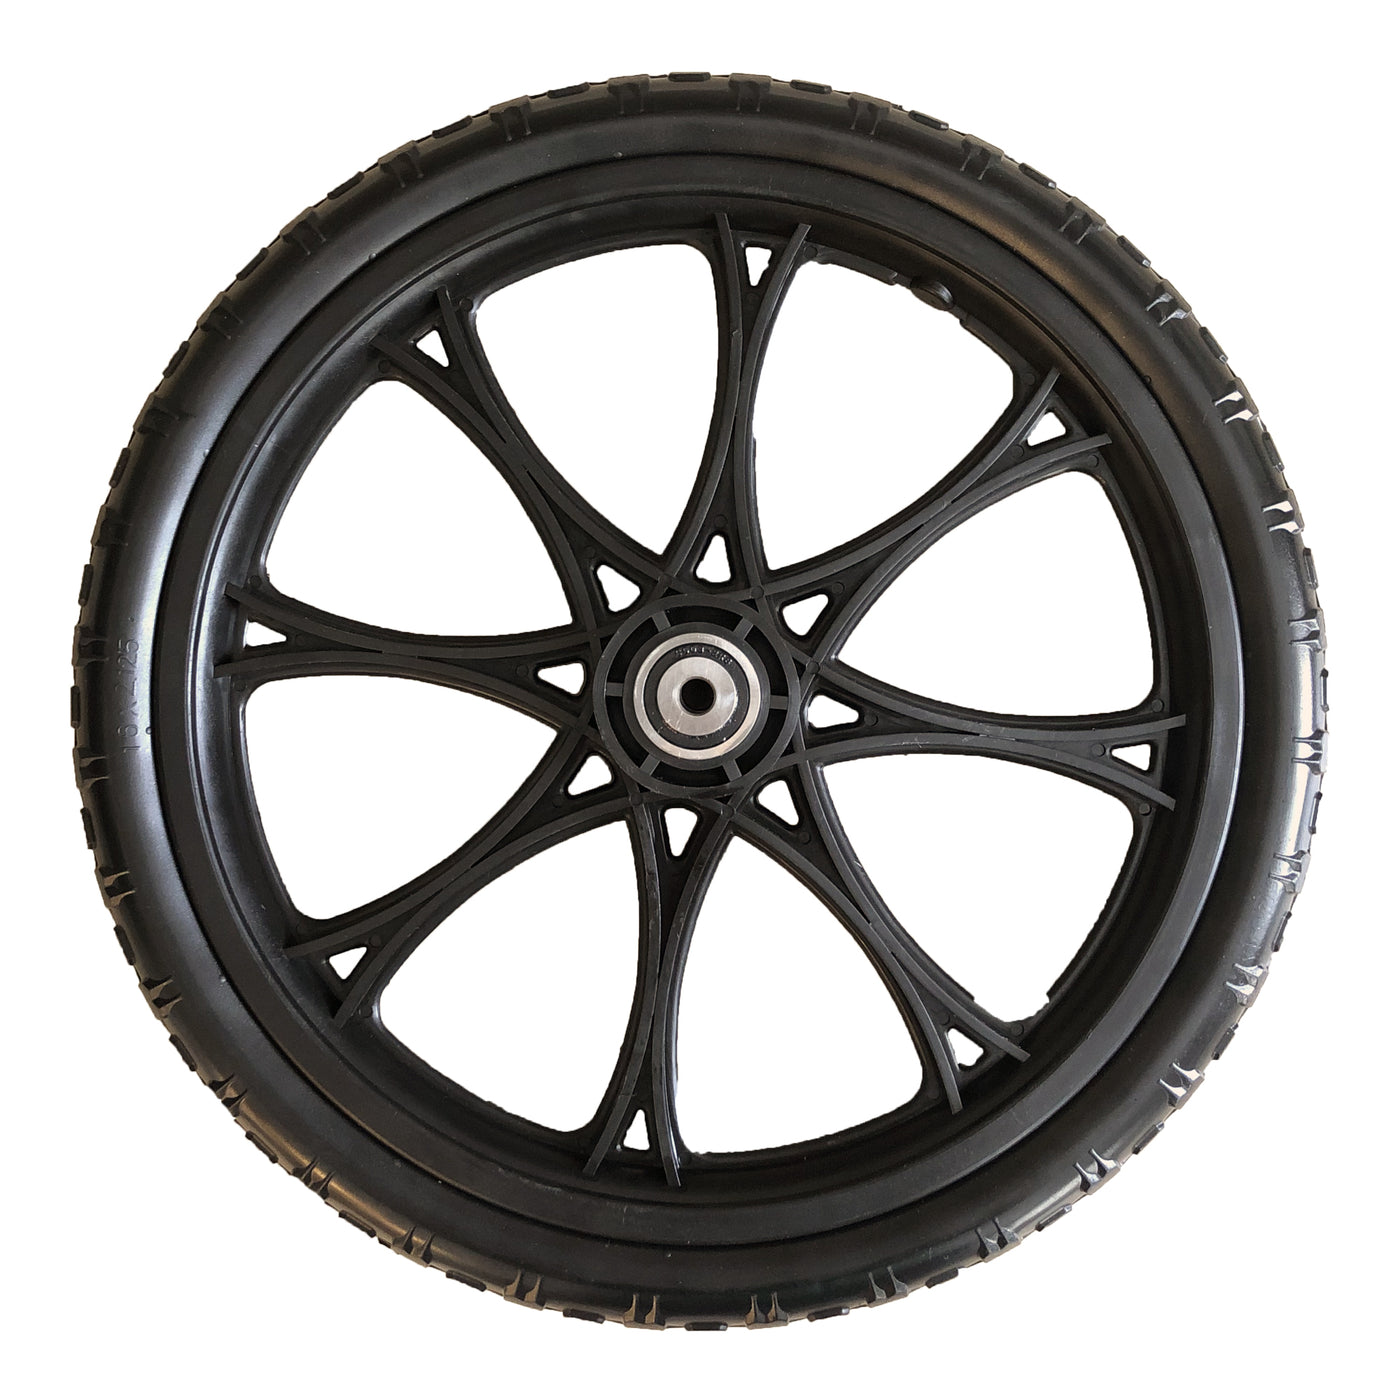 All-Terrain Airless Wheel (w/ Bearing) - OUT OF STOCK